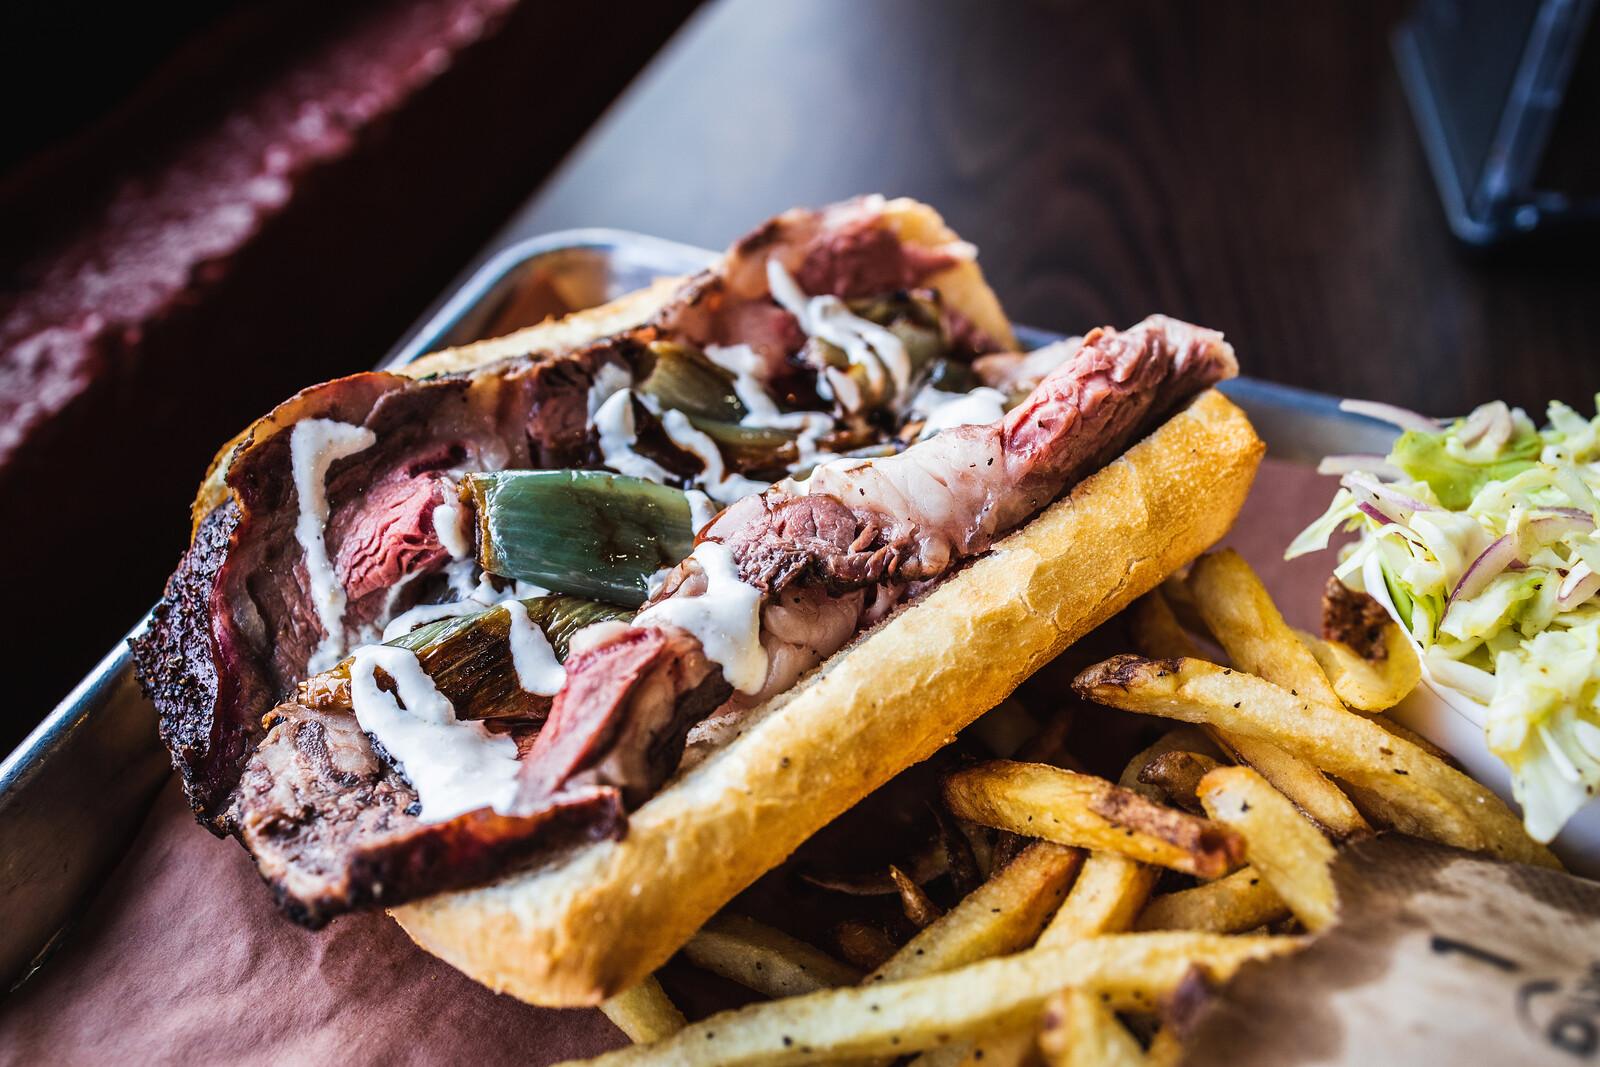 A prime rib sandwich on a French roll, topped with crispy shallot and horseradish cream, with a side of fries and coleslaw